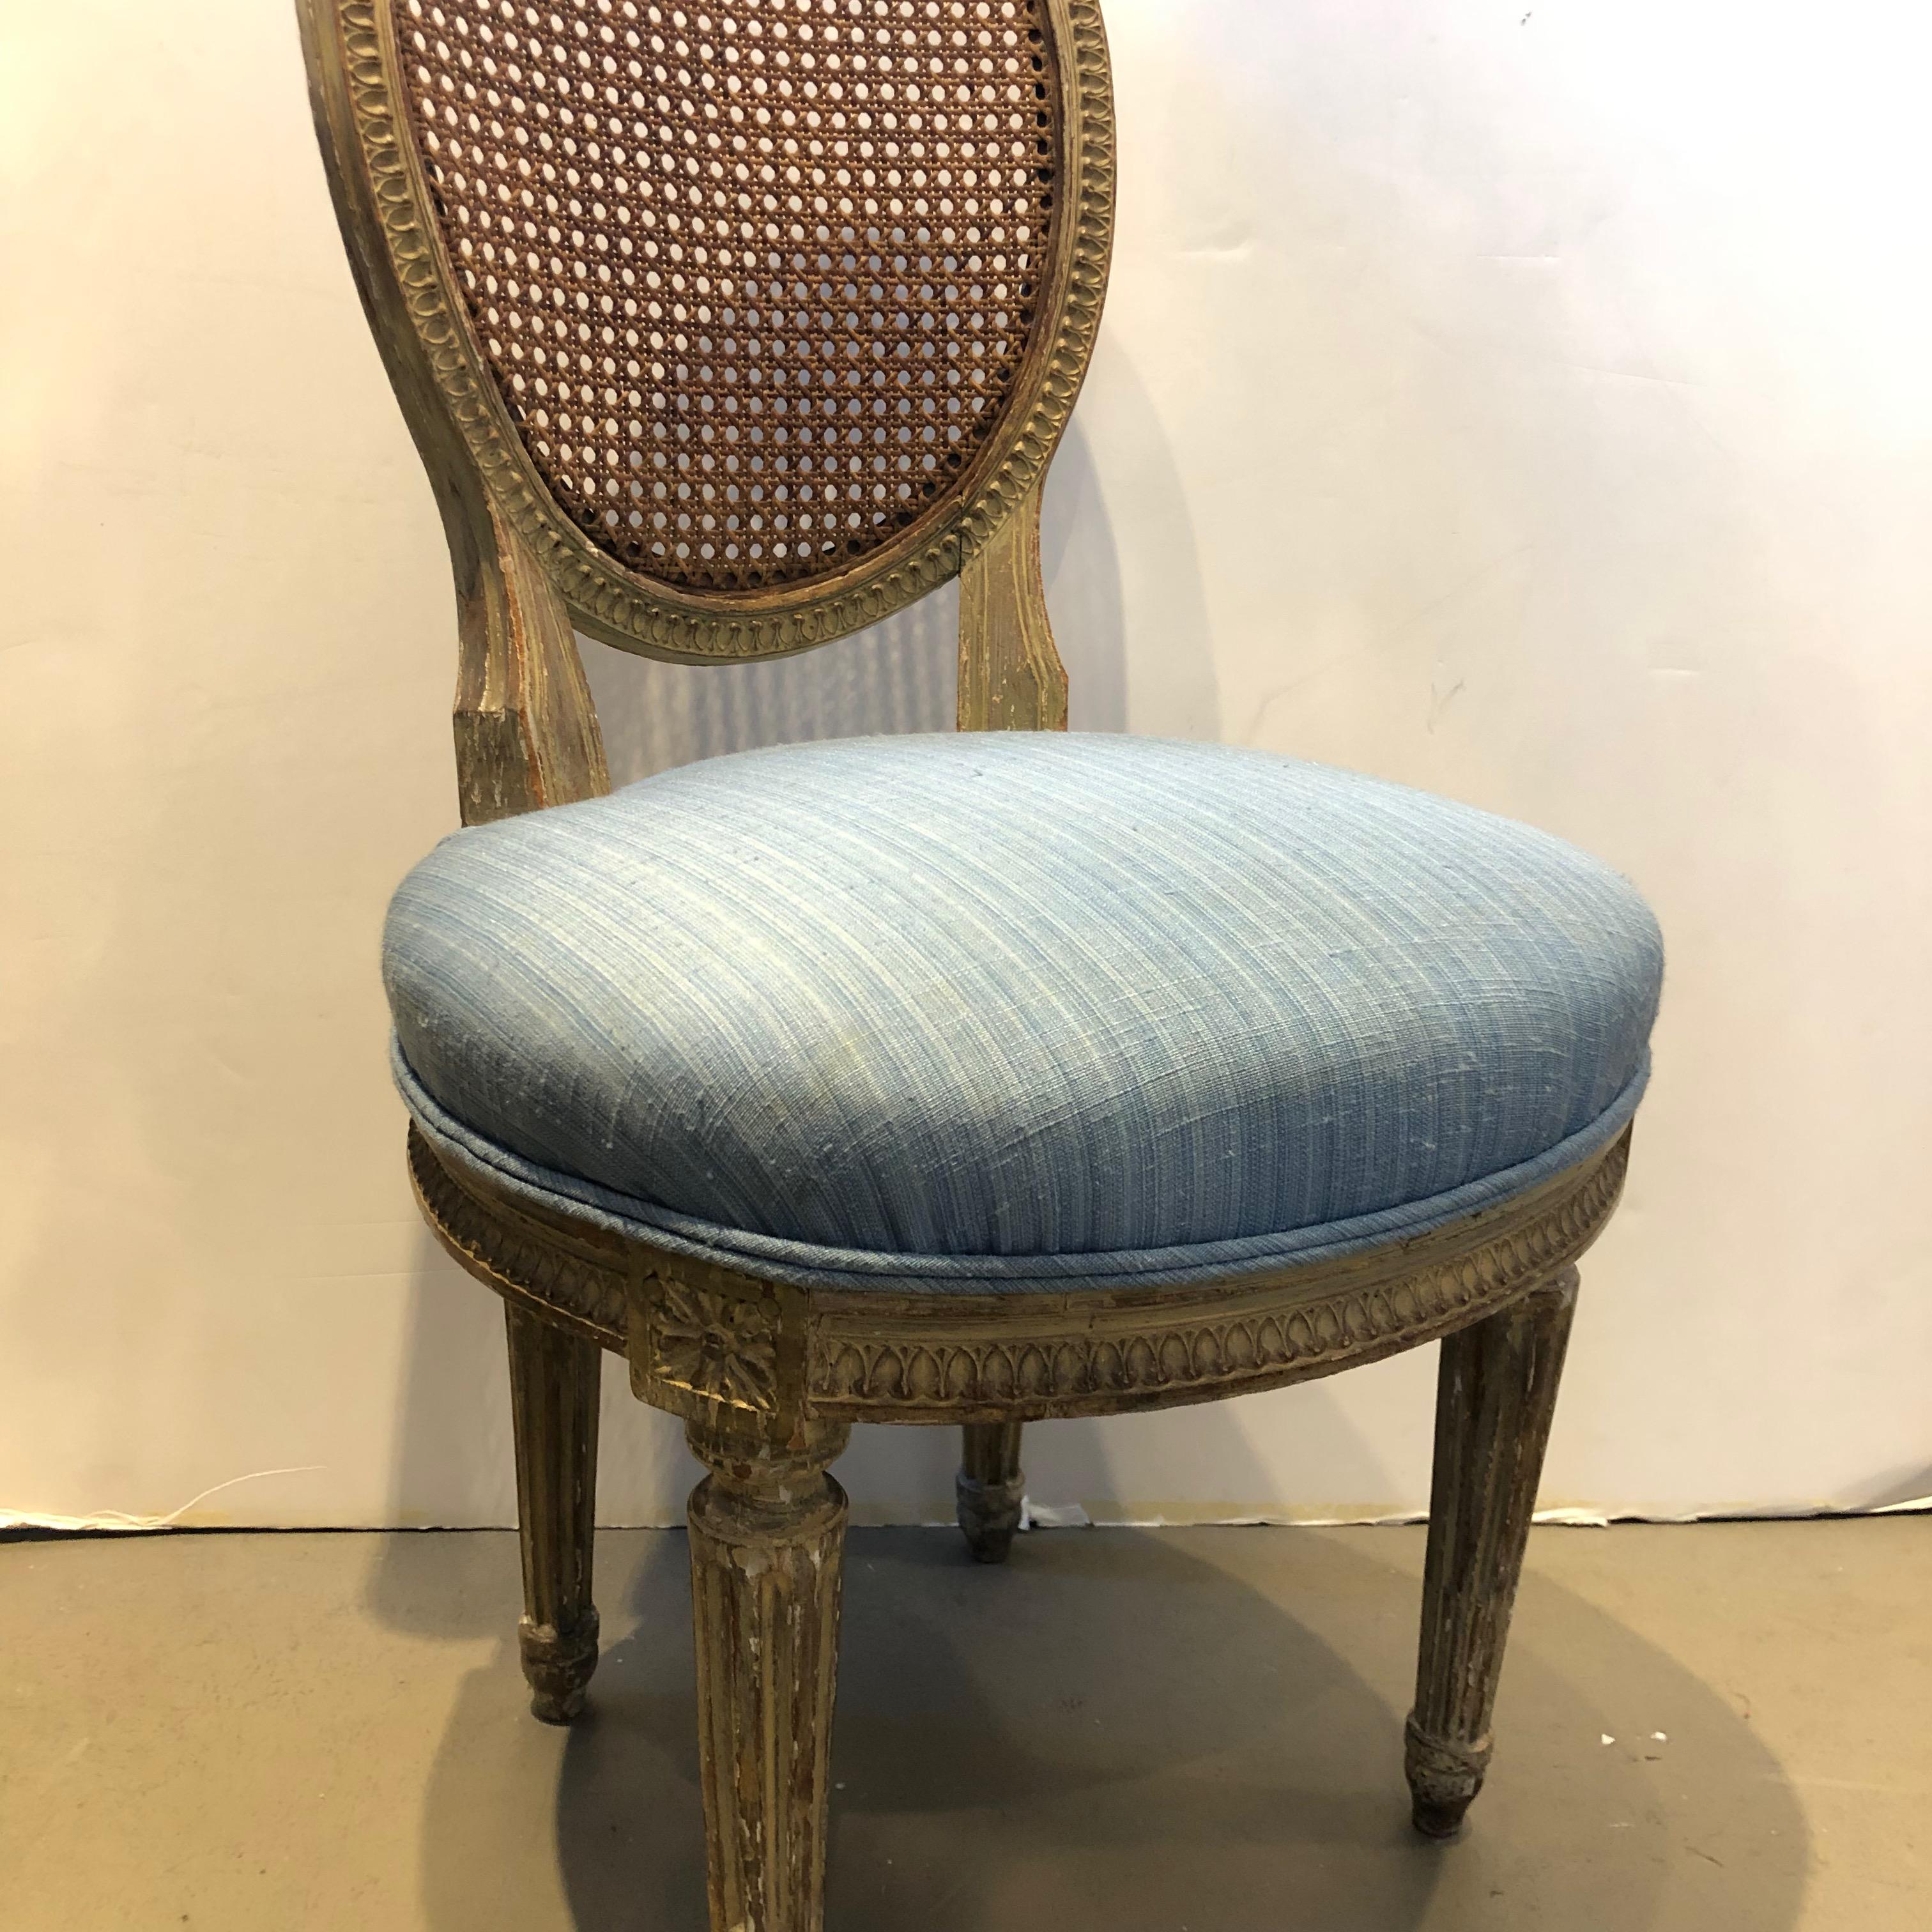 18th century French Louis XVI Victorian carved wooed caned chair with oval back.